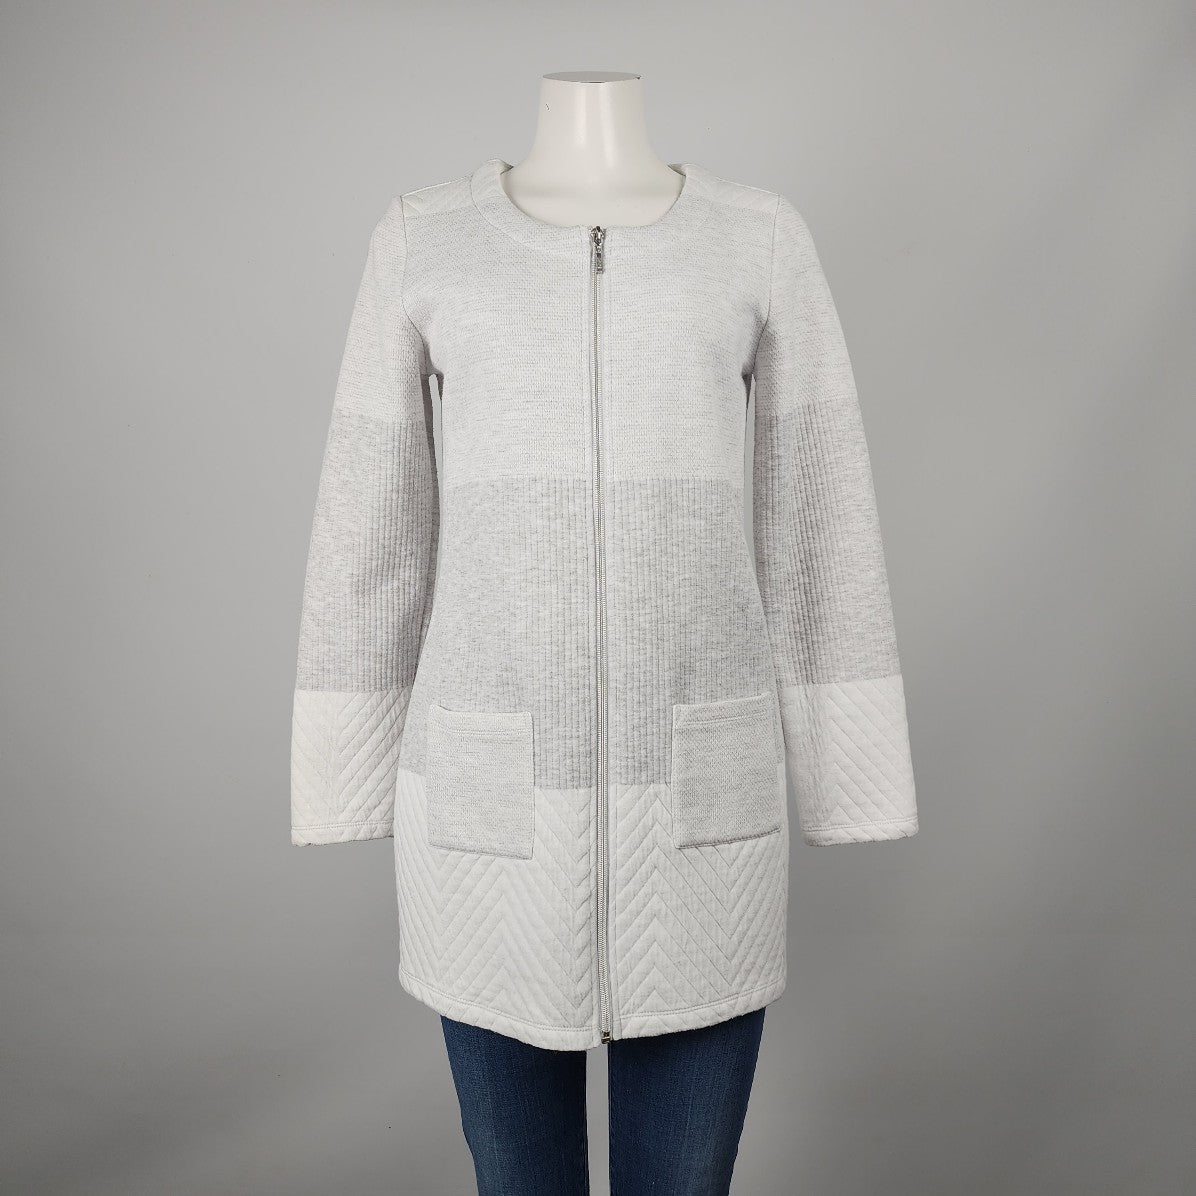 Yest White Quilted Zip Up Jacket Size 4